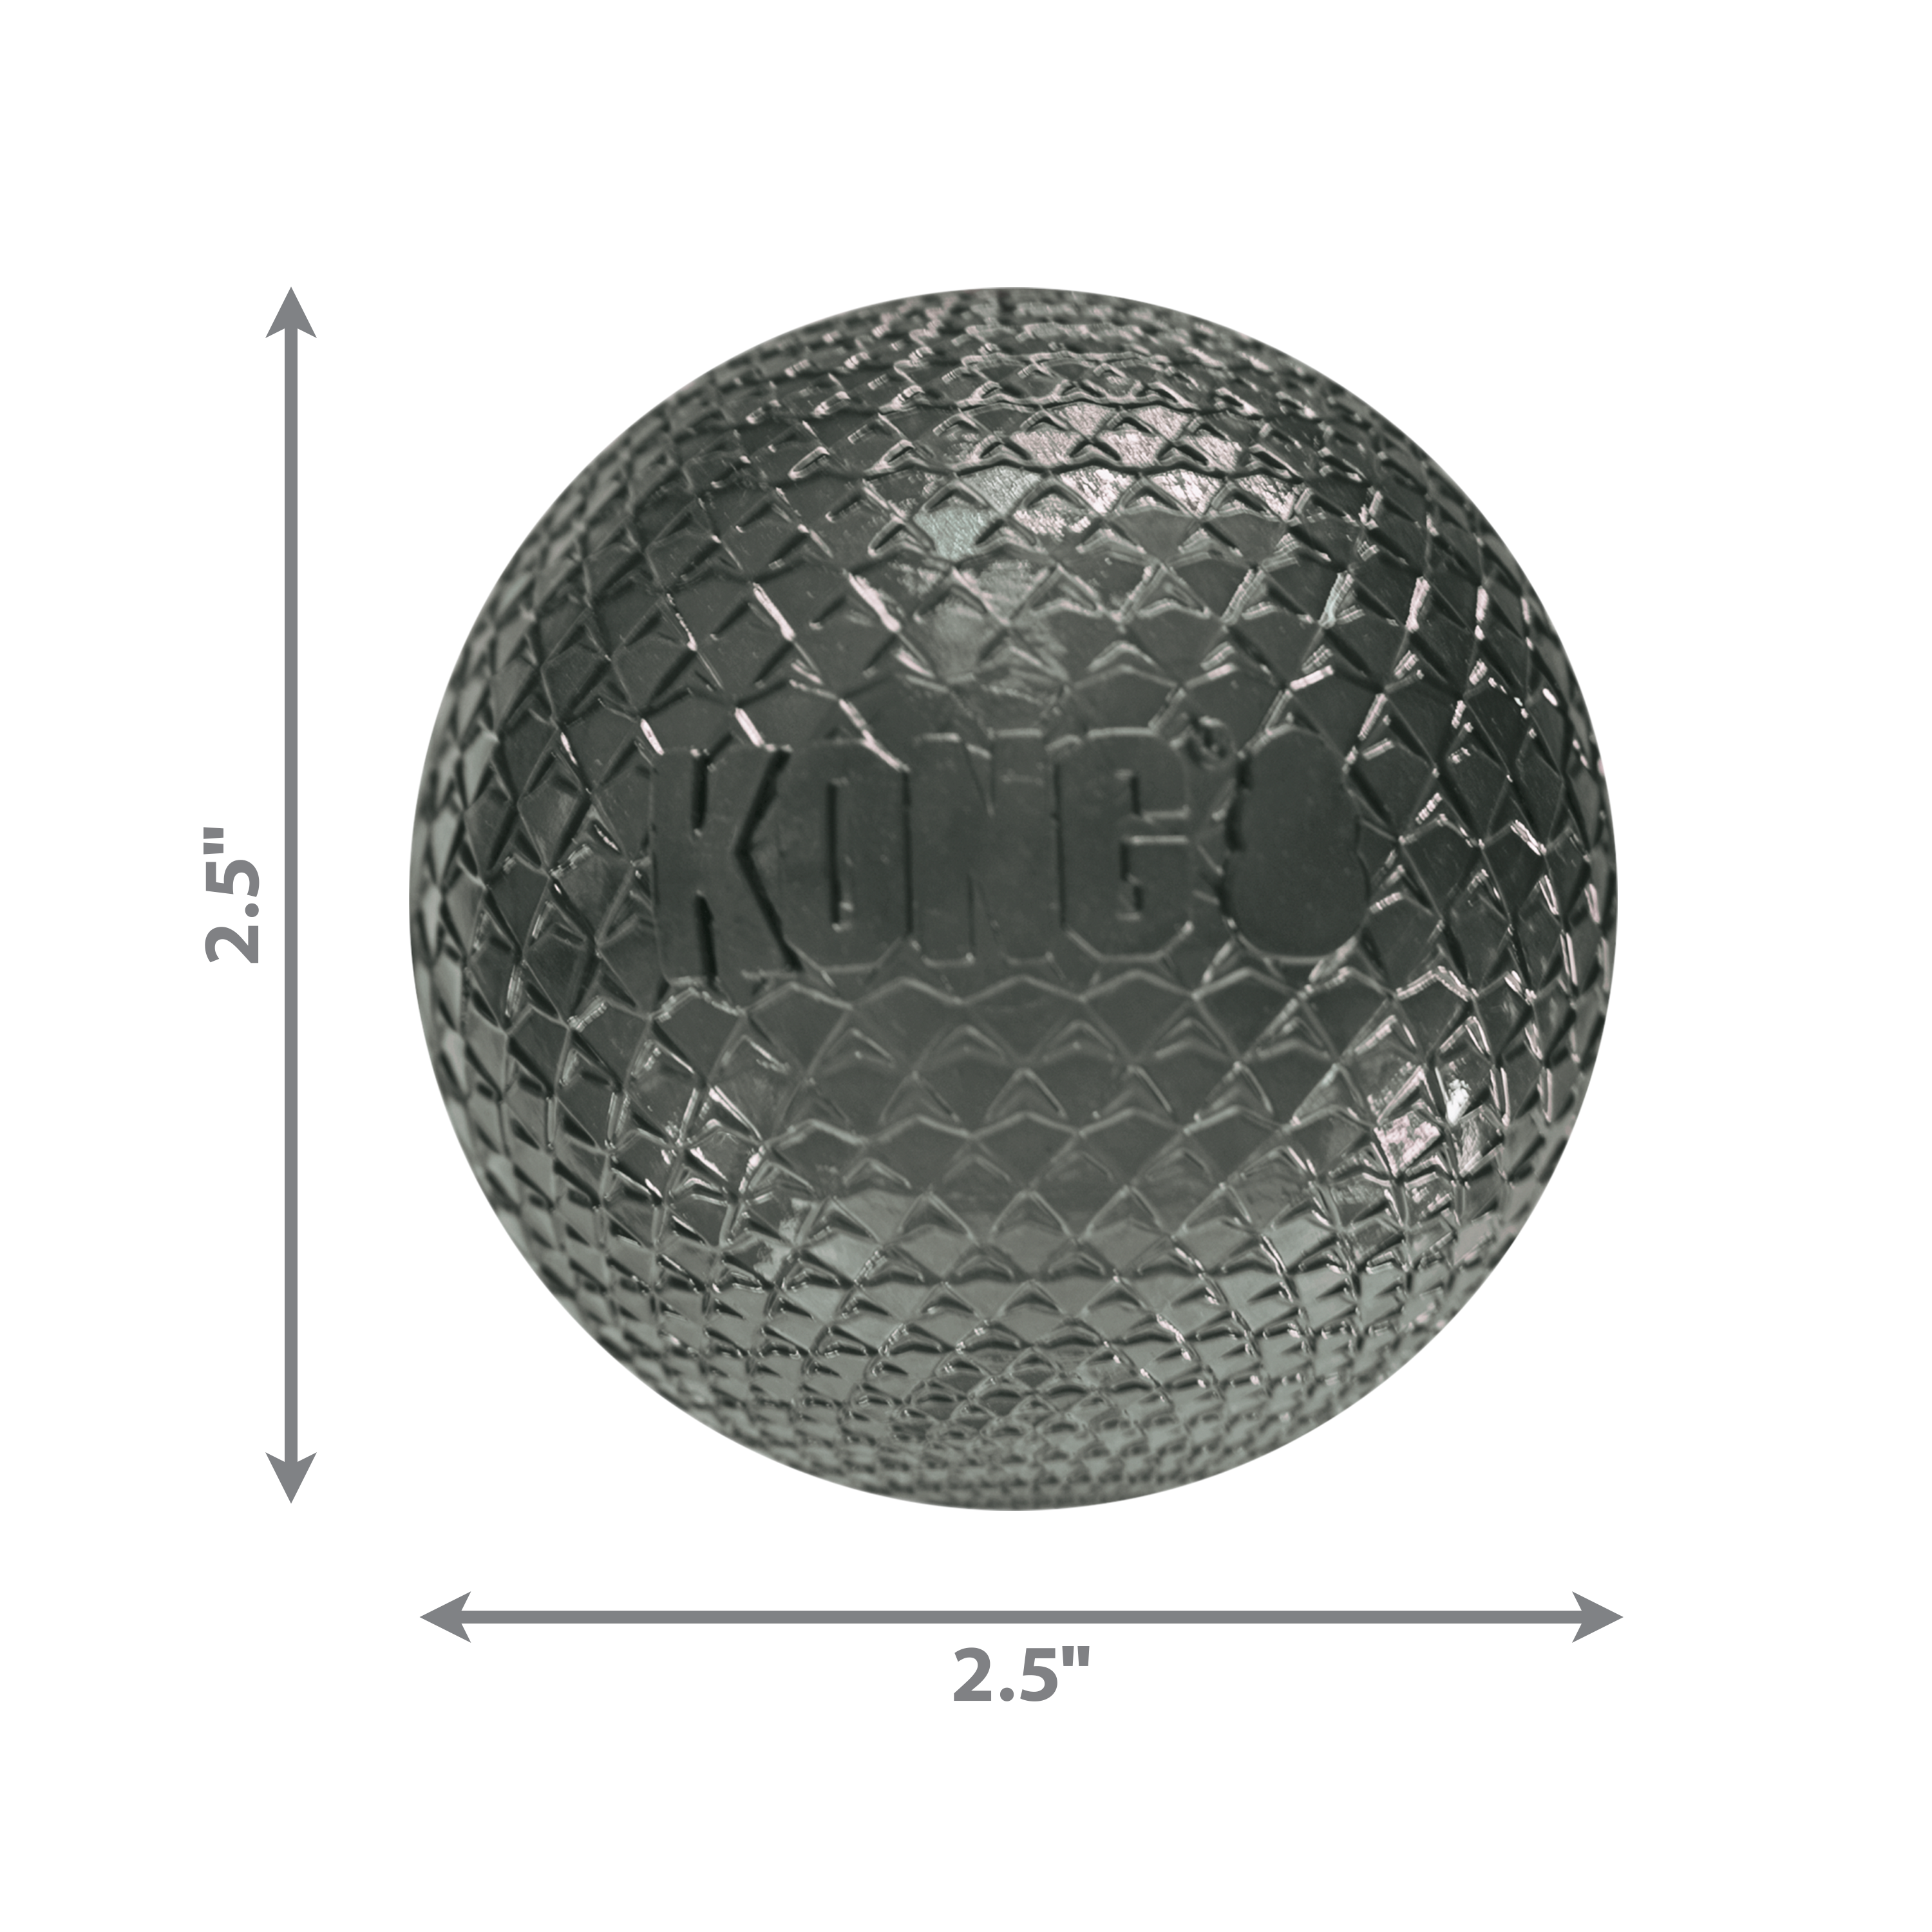 DuraMax Ball dimoffpack product image